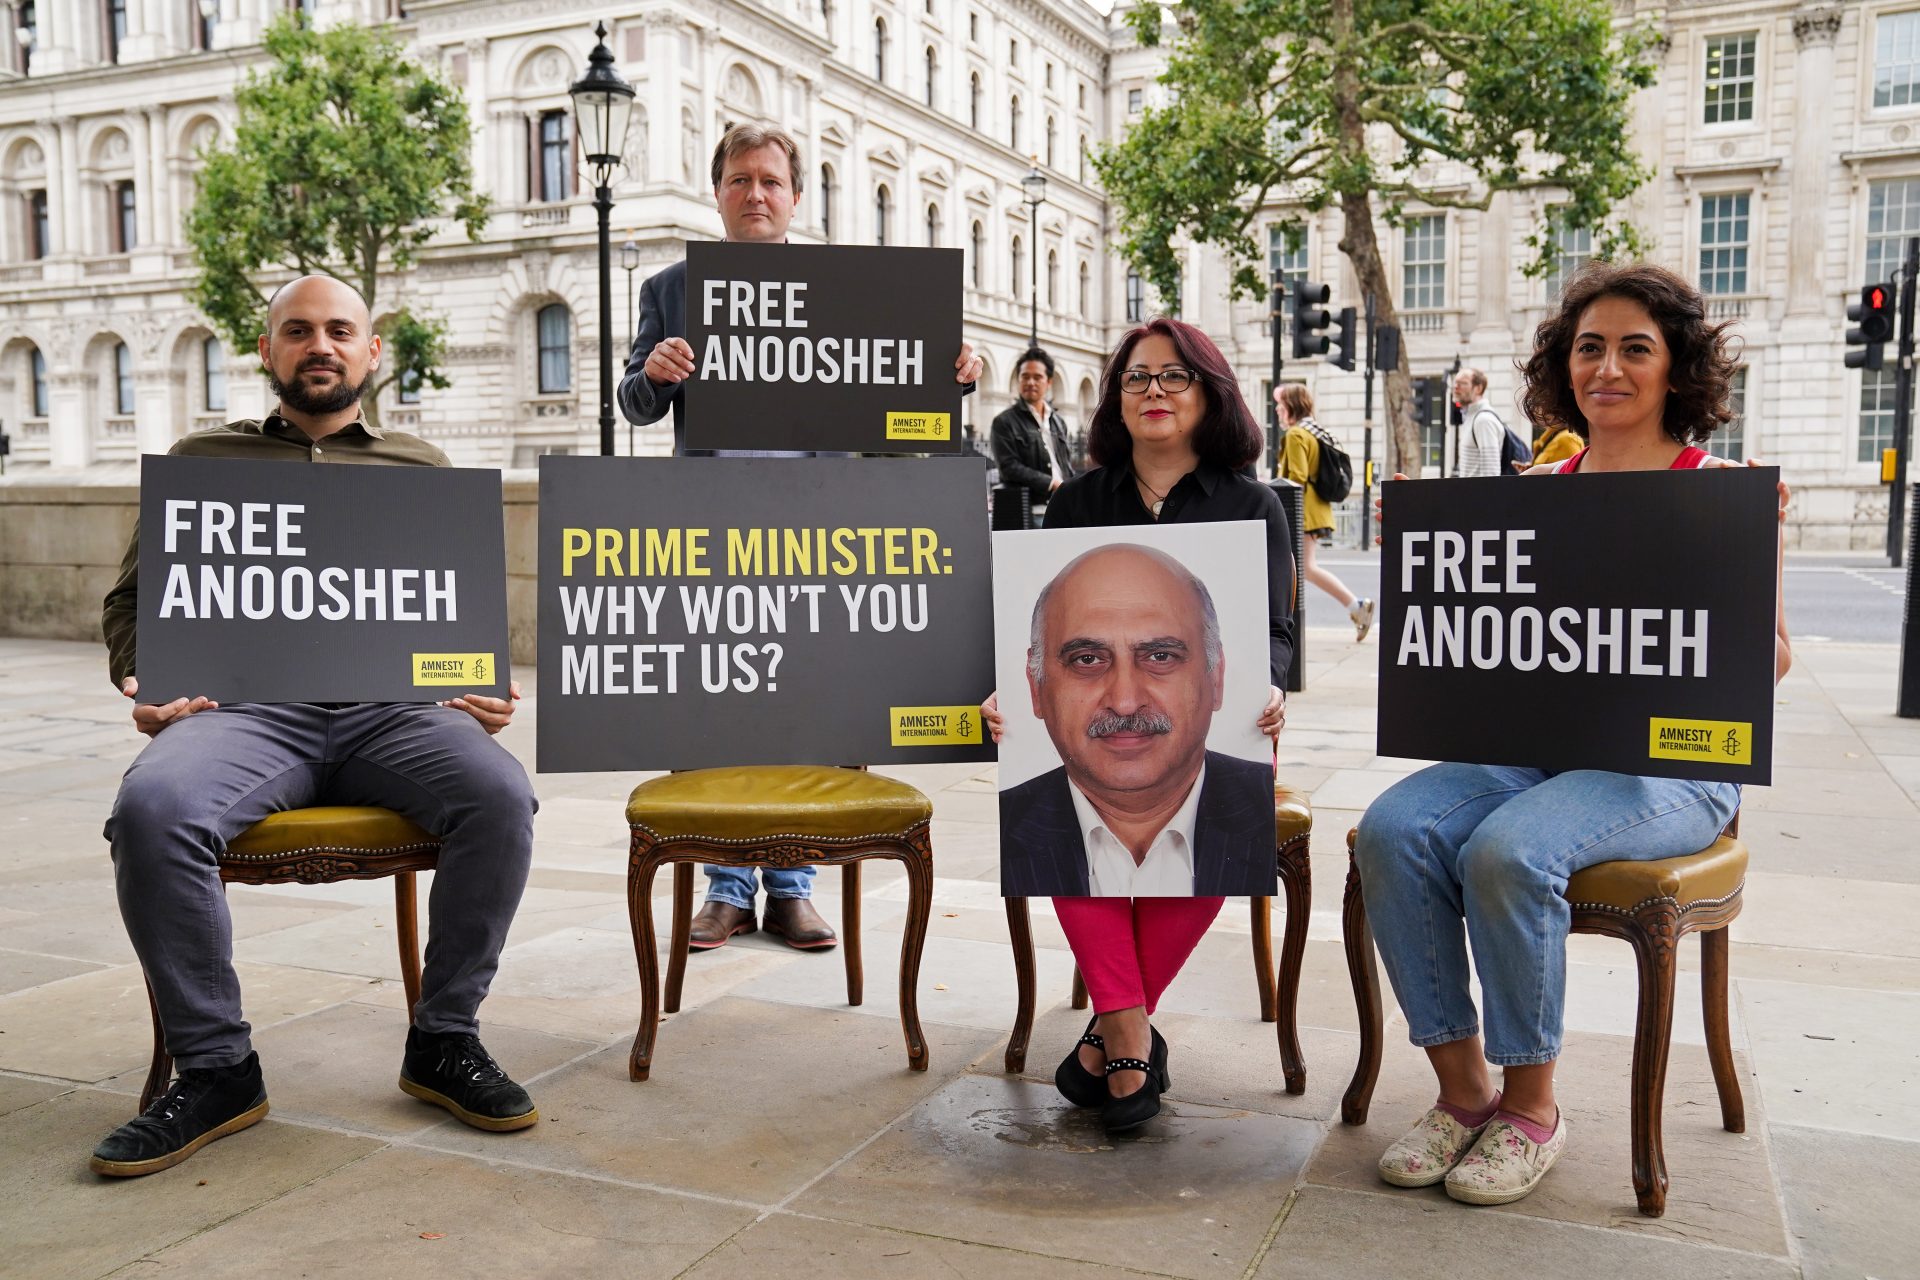 Aryan Ashoori, the son of Anoosheh Ashoori, Richard Ratcliffe, Sherry Izadi and Elika Ashoori, the wife and daughter of Anoosheh Ashoori during a protest outside Downing Street in August. Photo: Kirsty O'Connor/PA Wire/PA Images.